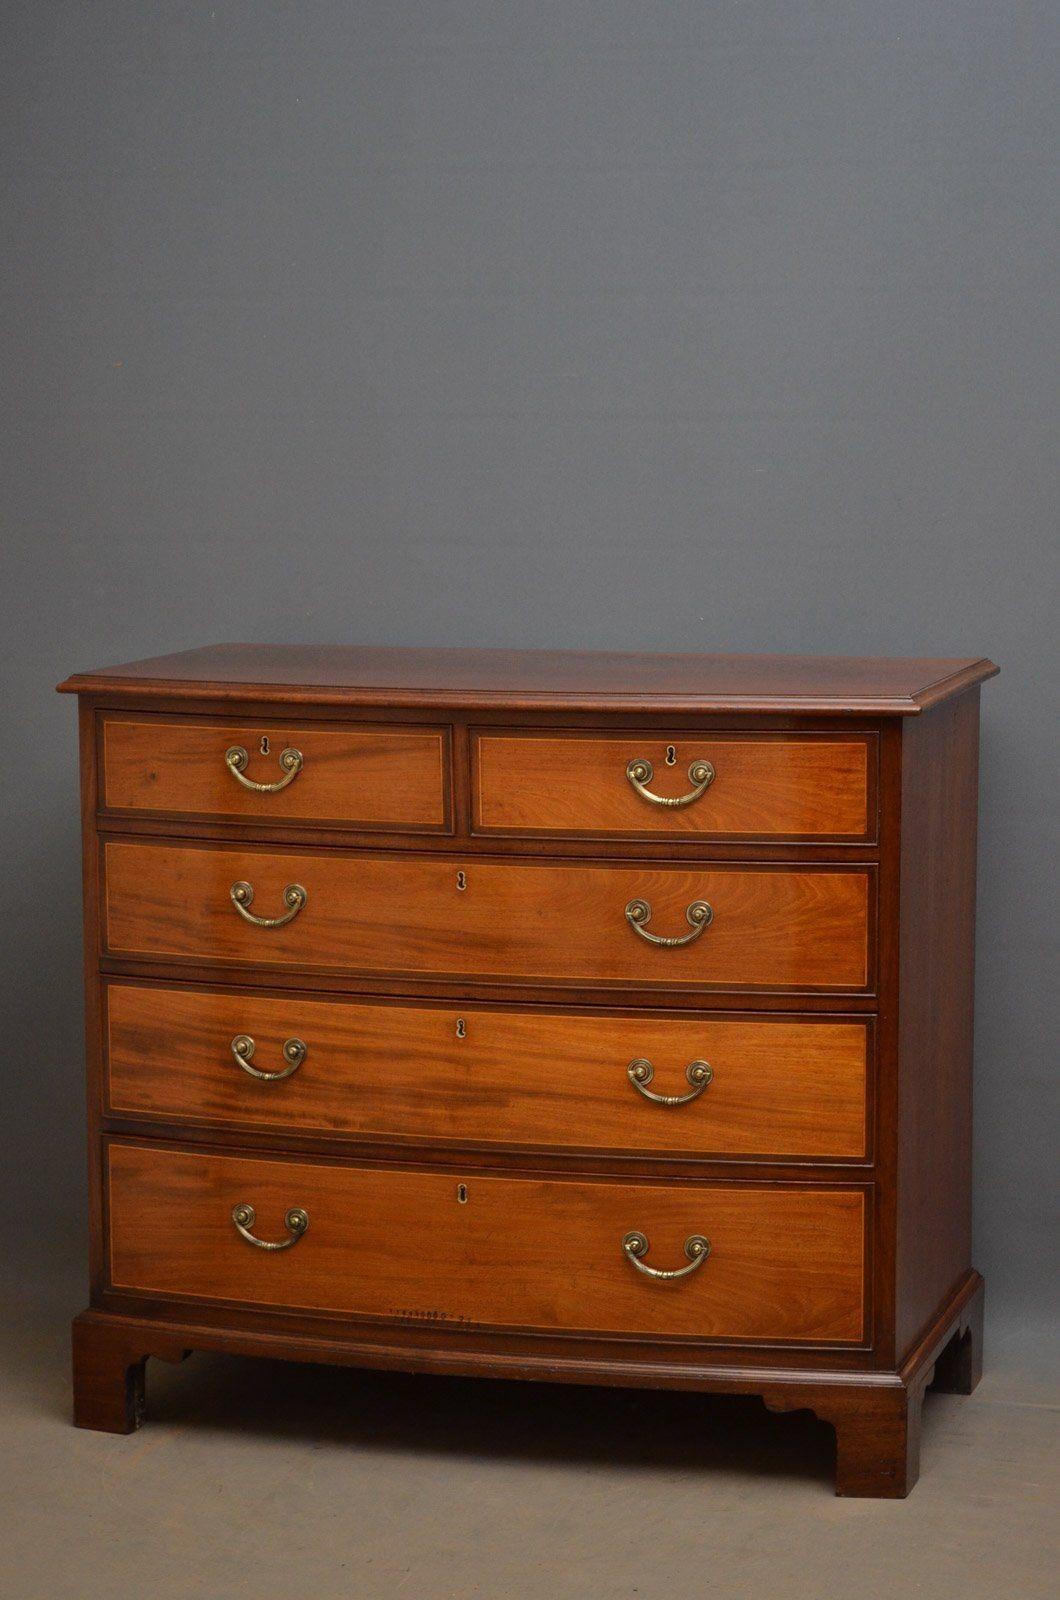 Sn3976 Regency bow fronted chest of generous proportions, having figured top above 2 short and 3 long cockbeaded, string inlaid and oak lined drawers, all fitted with original brass handles, standing on original bracket feet. This antique chest of